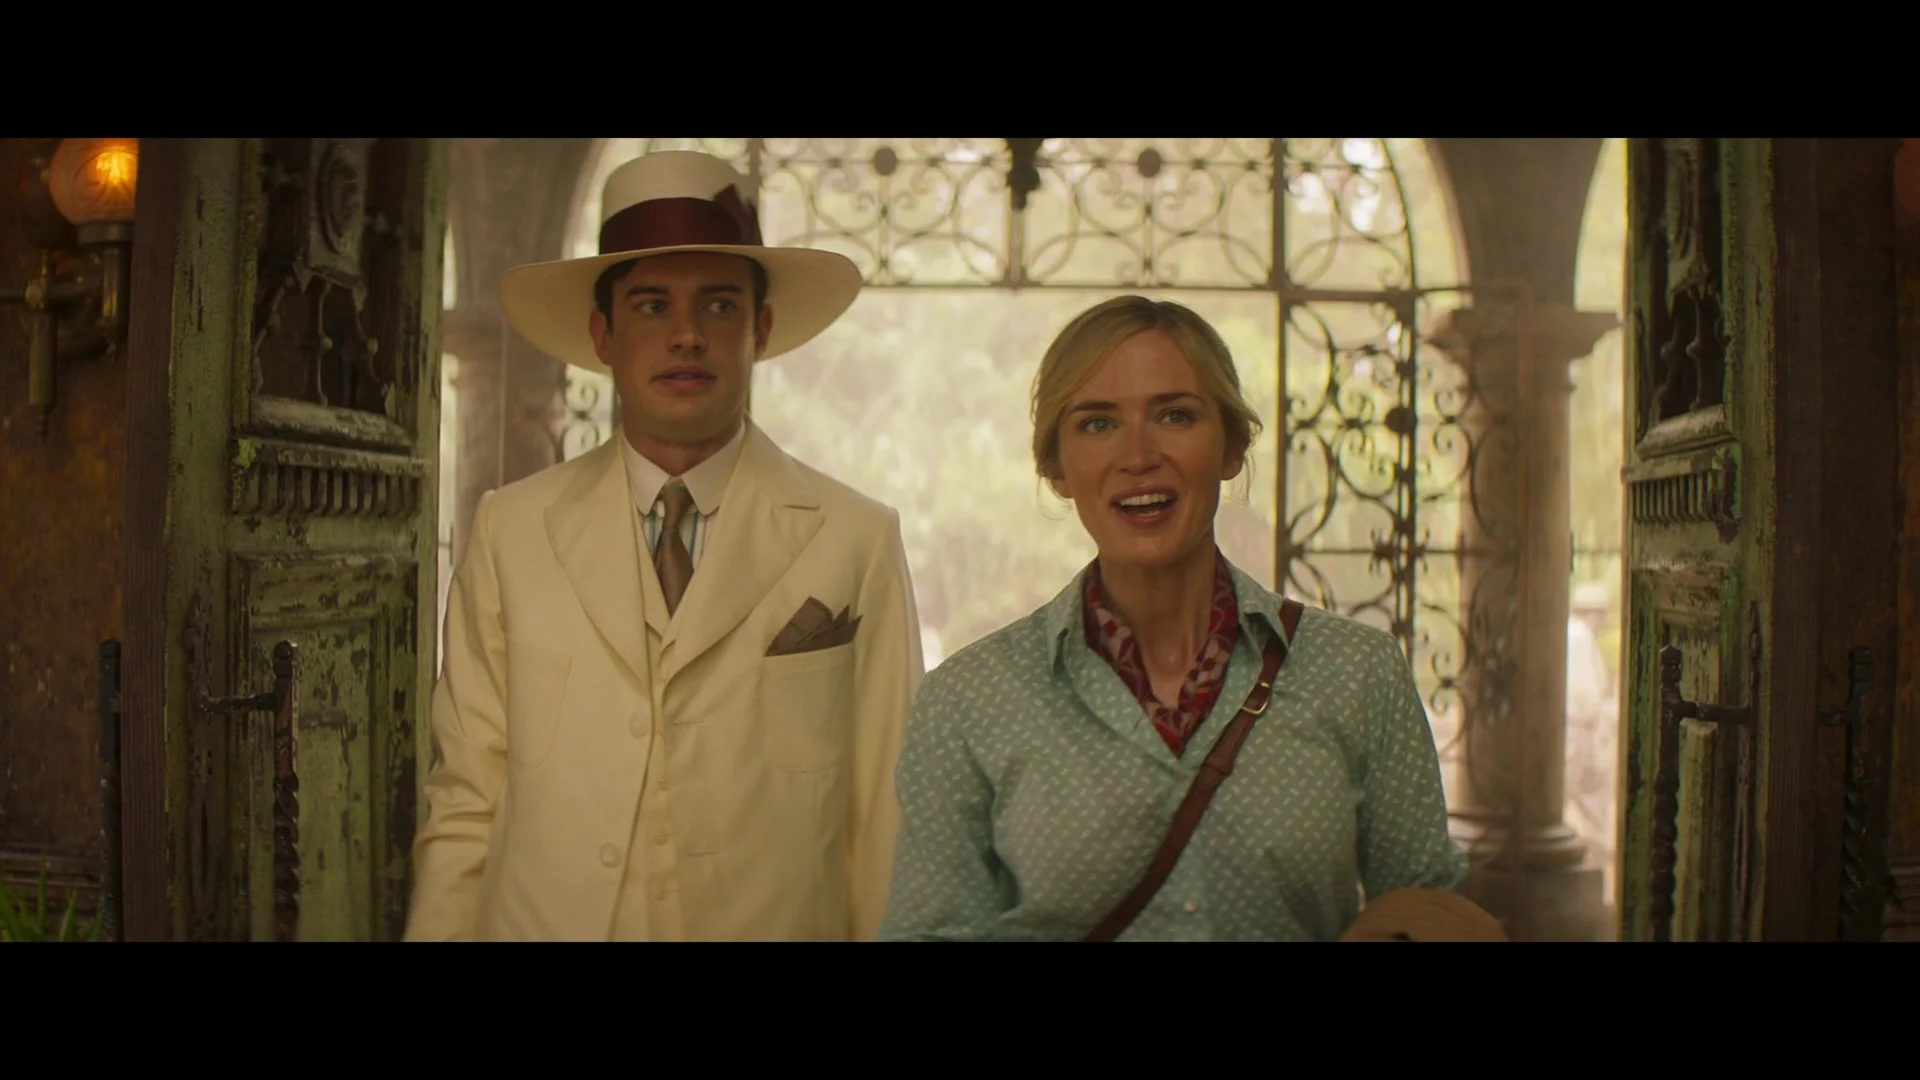 MacGregor Houghton (Jack Whitehall) works as an assistant to his sister, Dr. Lily Houghton (Emily Blunt) after their family disowned him for being gay in Jungle Cruise (2021), Disney